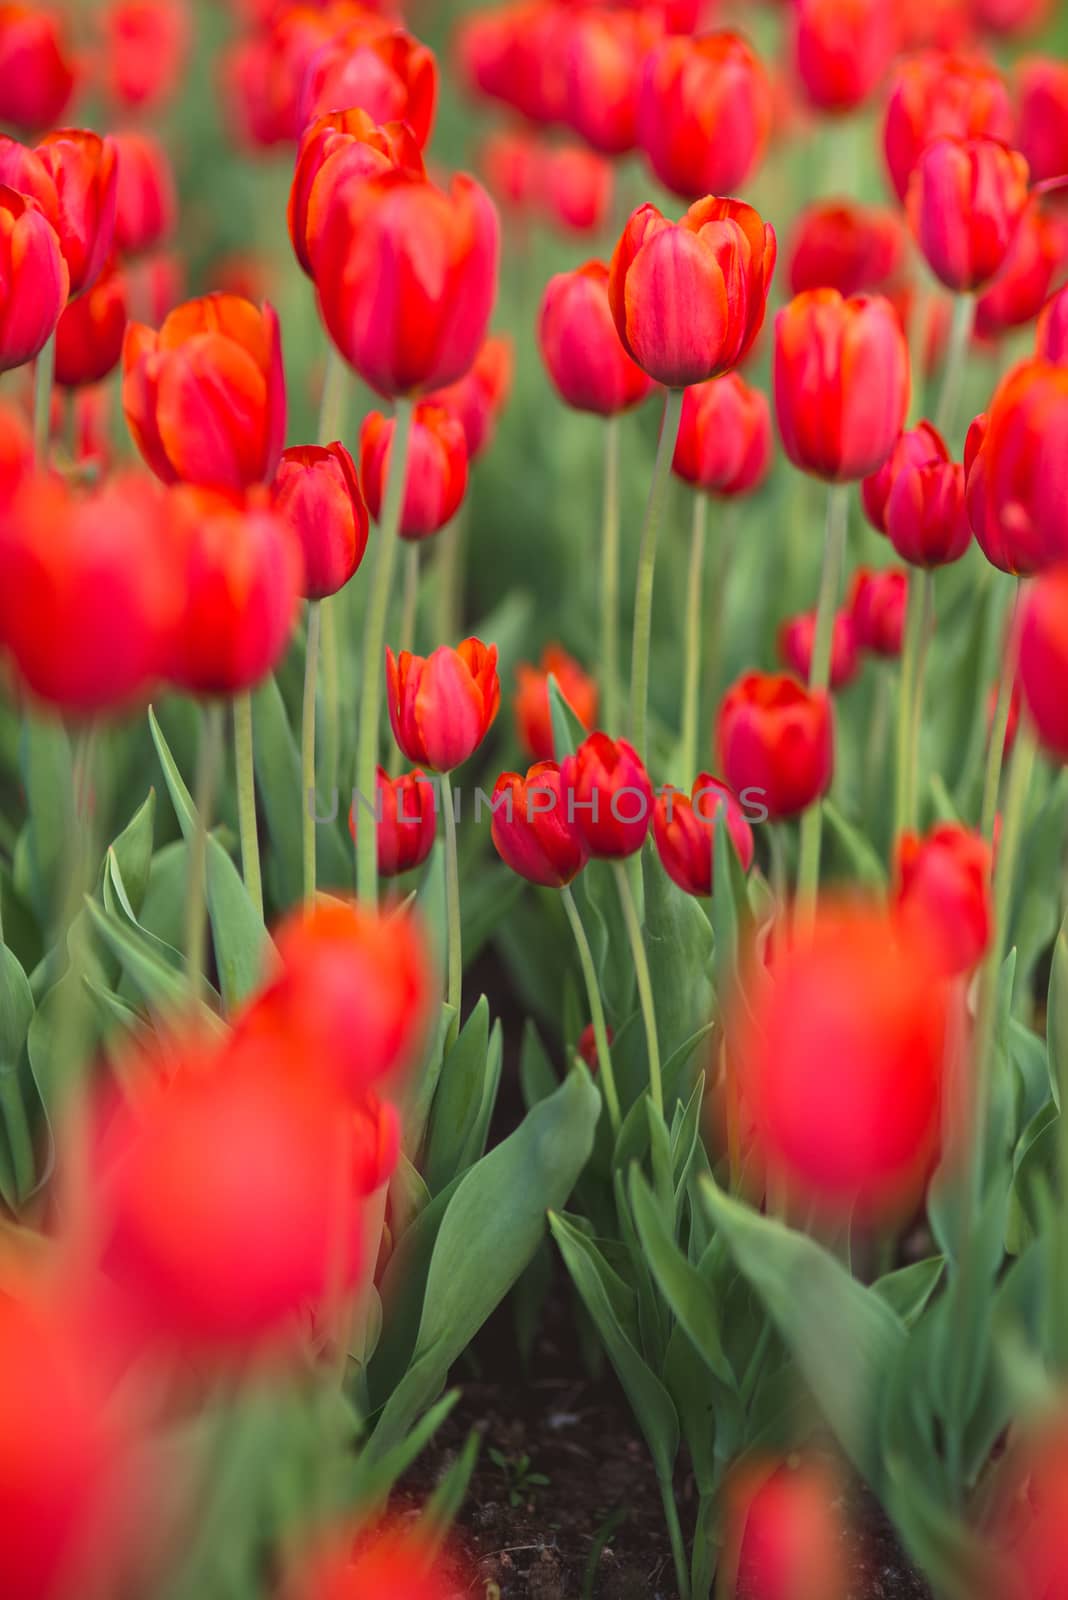 Group of red tulips in the park. Spring blurred background.